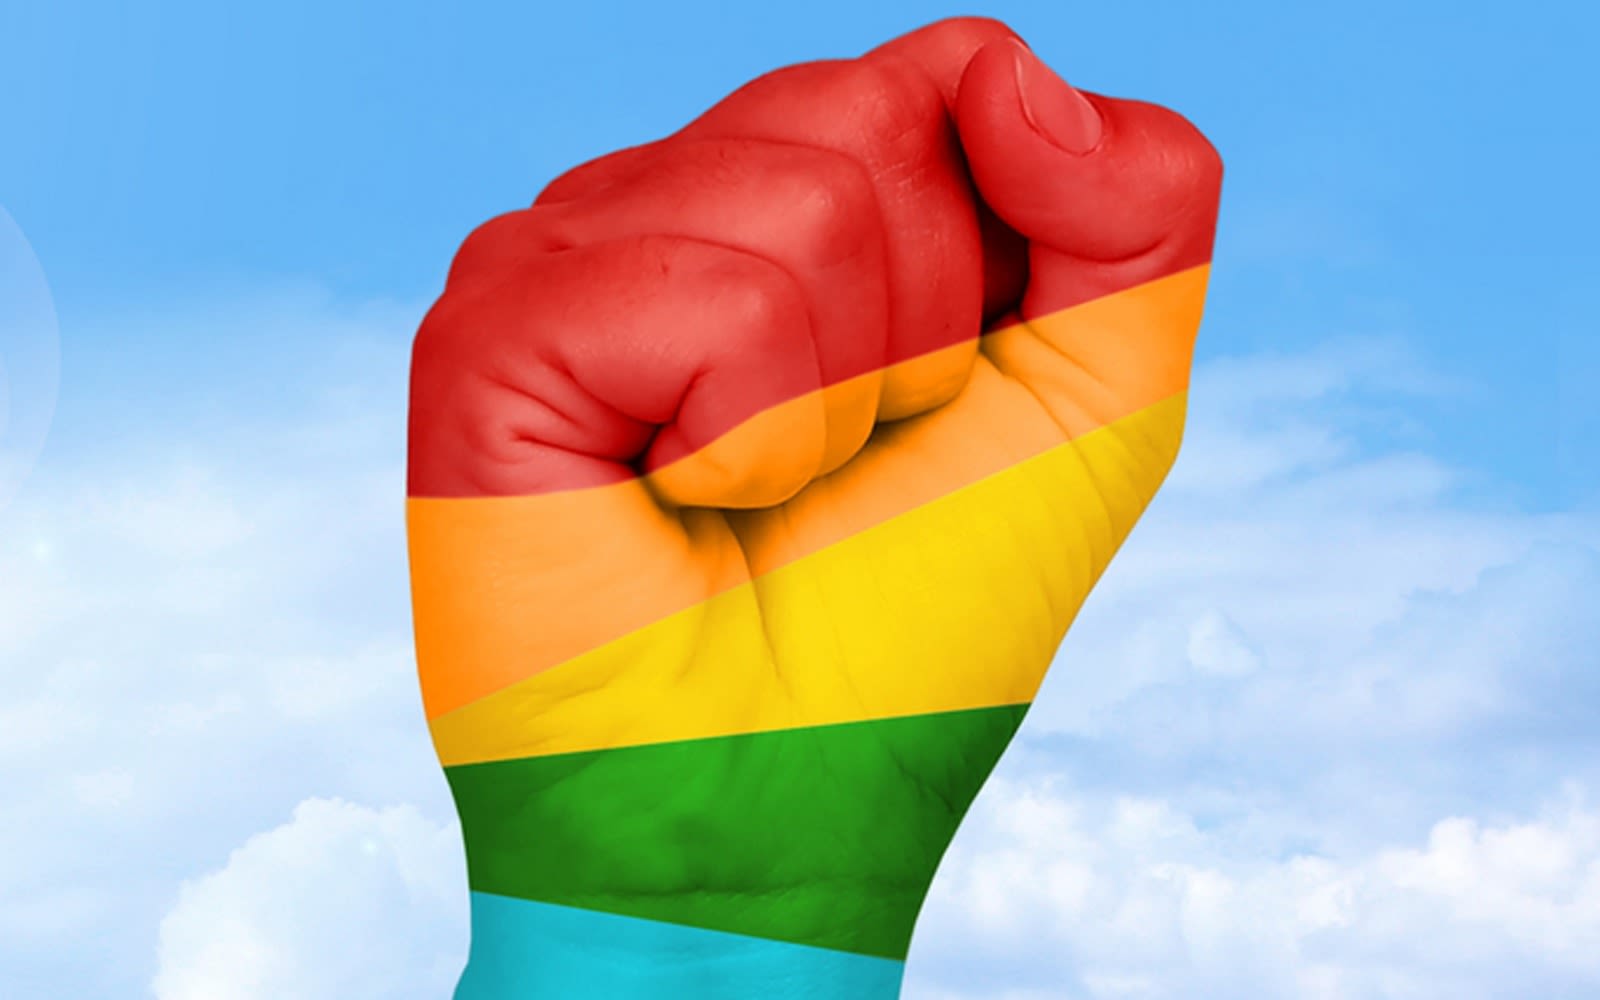 A clenched fist raised up with five colours of the rainbow in stripes across it - red, orange, yellow, green, blue